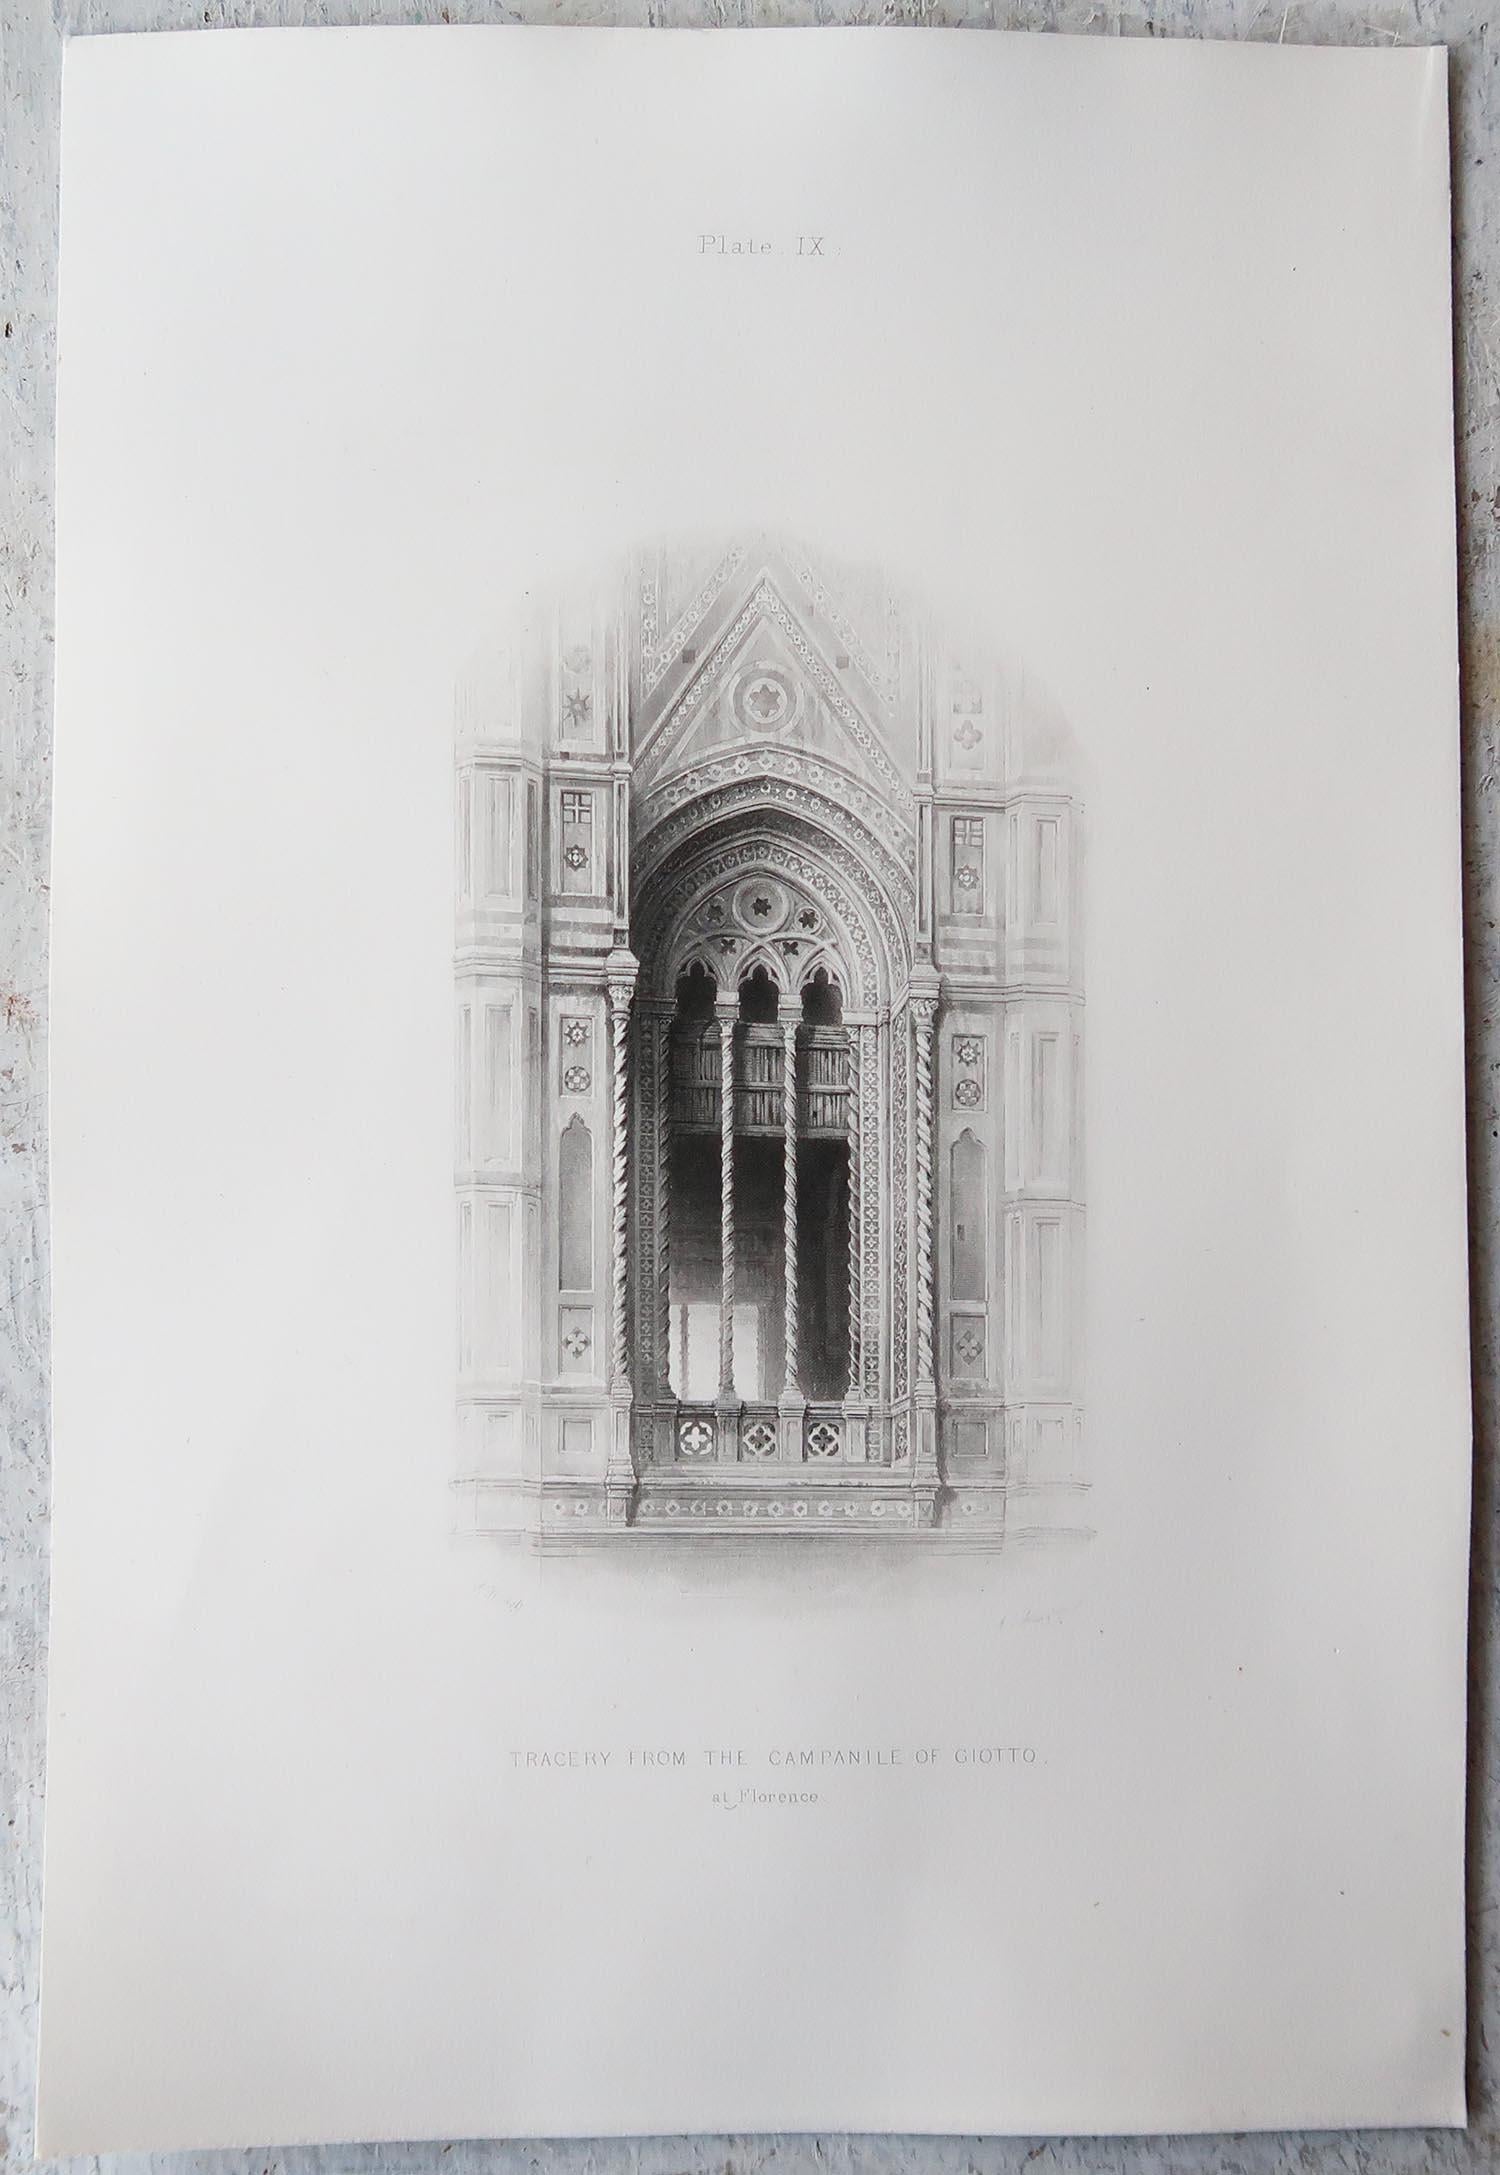 Gothic Revival Original Antique Architectural Print by John Ruskin, circa 1880, 'Florence'